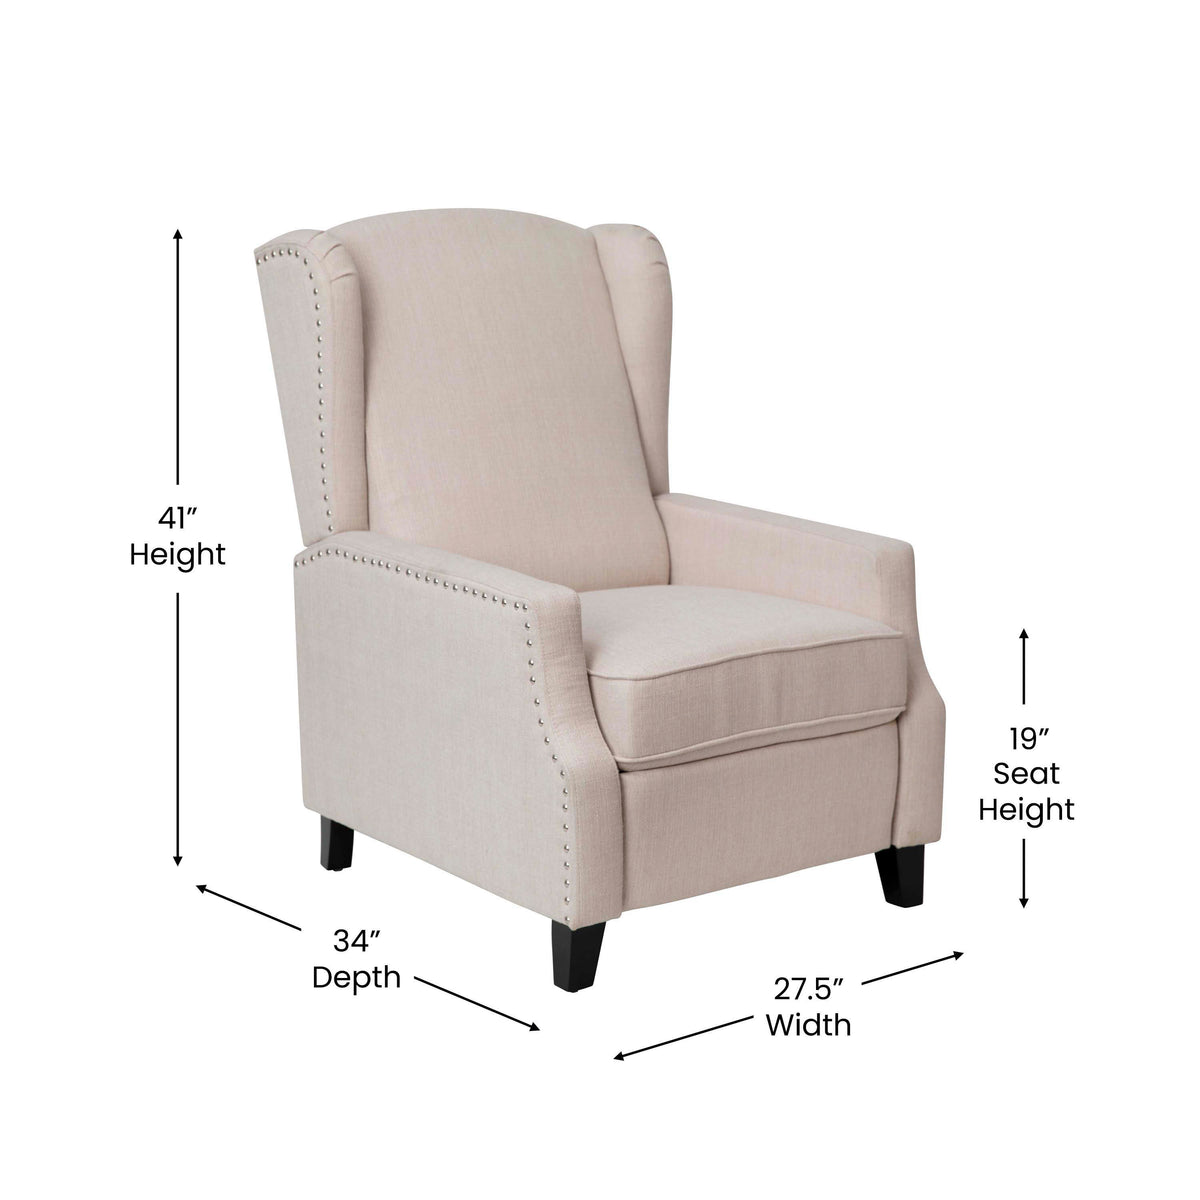 Cream |#| Push Back Wing Back Pocket Spring Recliner in Cream with Side Accent Nail Trim